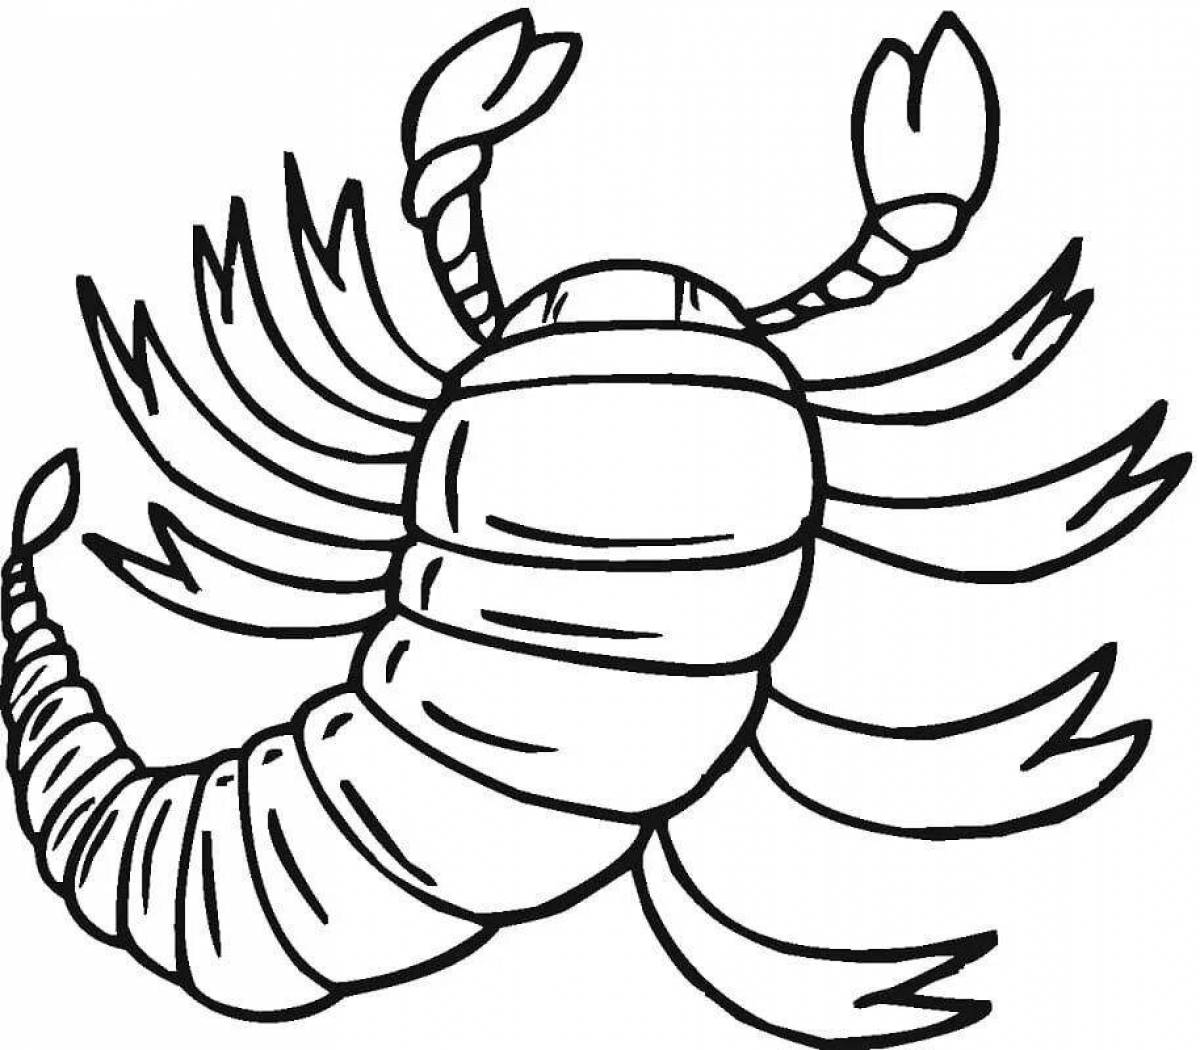 Dramatic scorpion coloring page